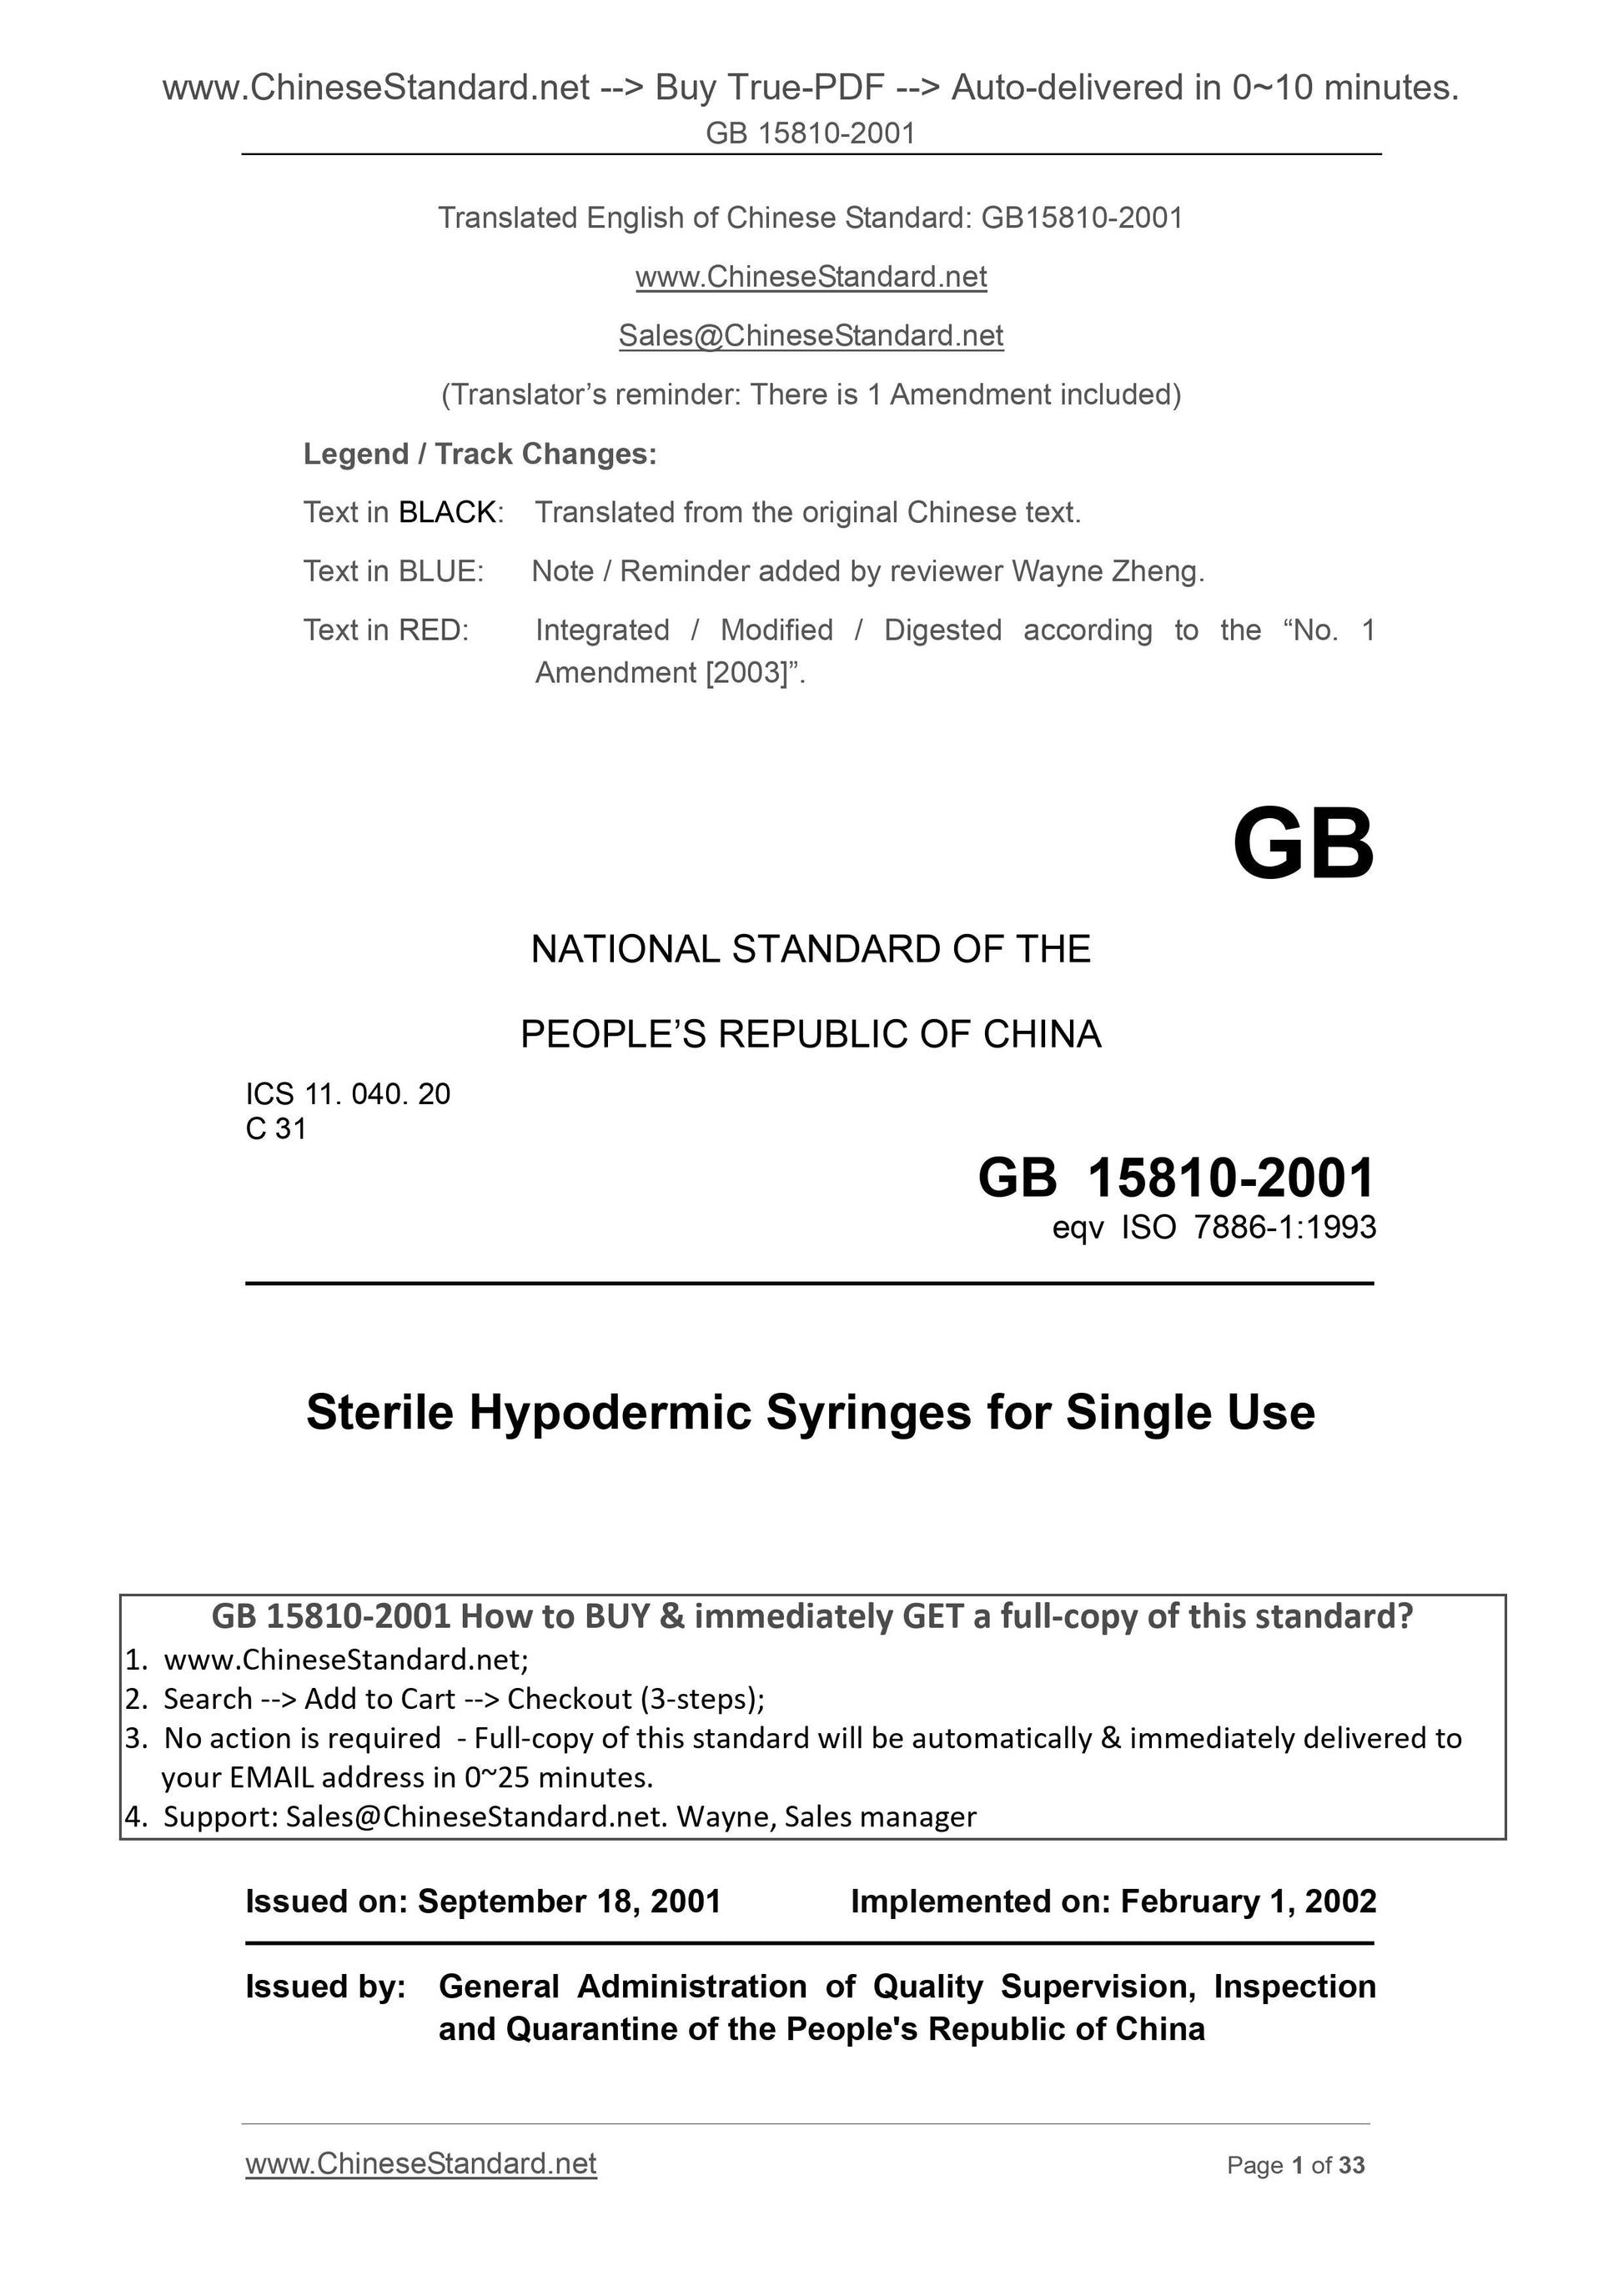 GB 15810-2001 Page 1